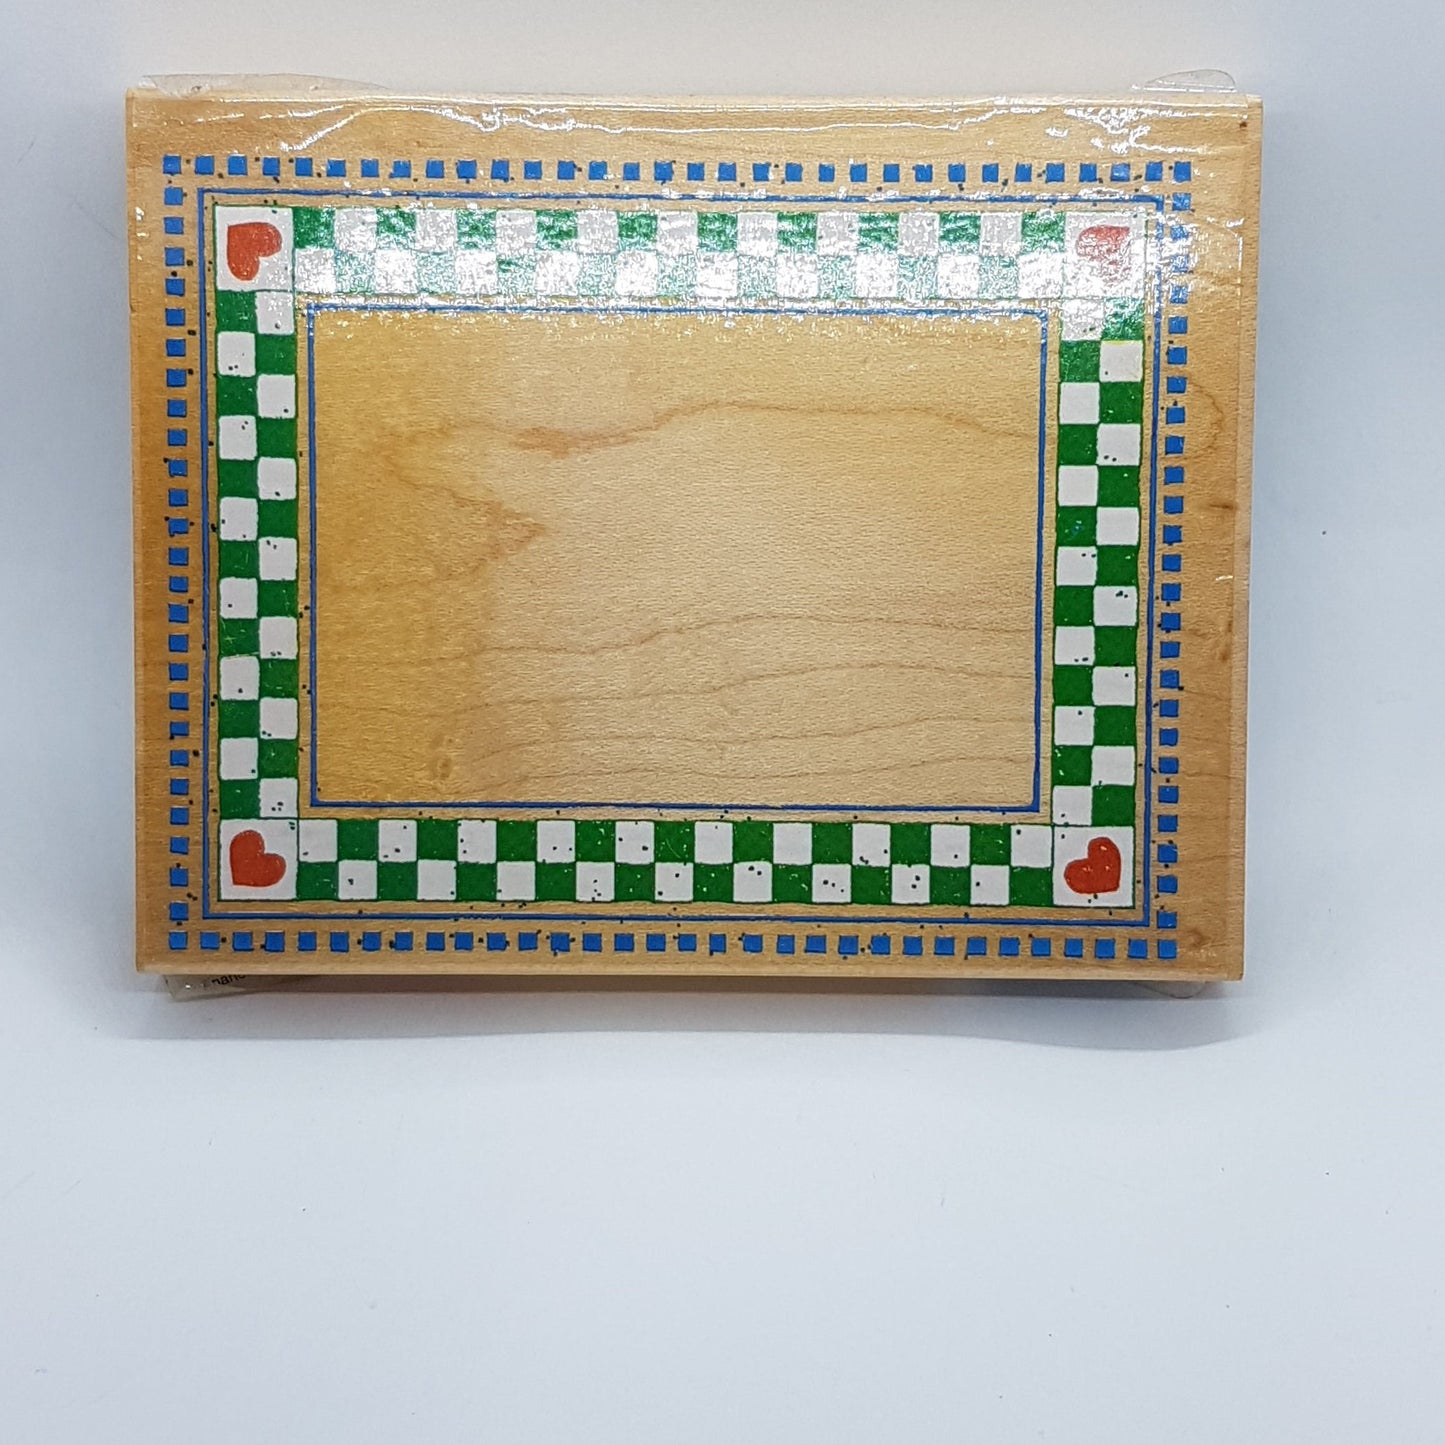 Checkered Frame Wooden Rubber Stamp